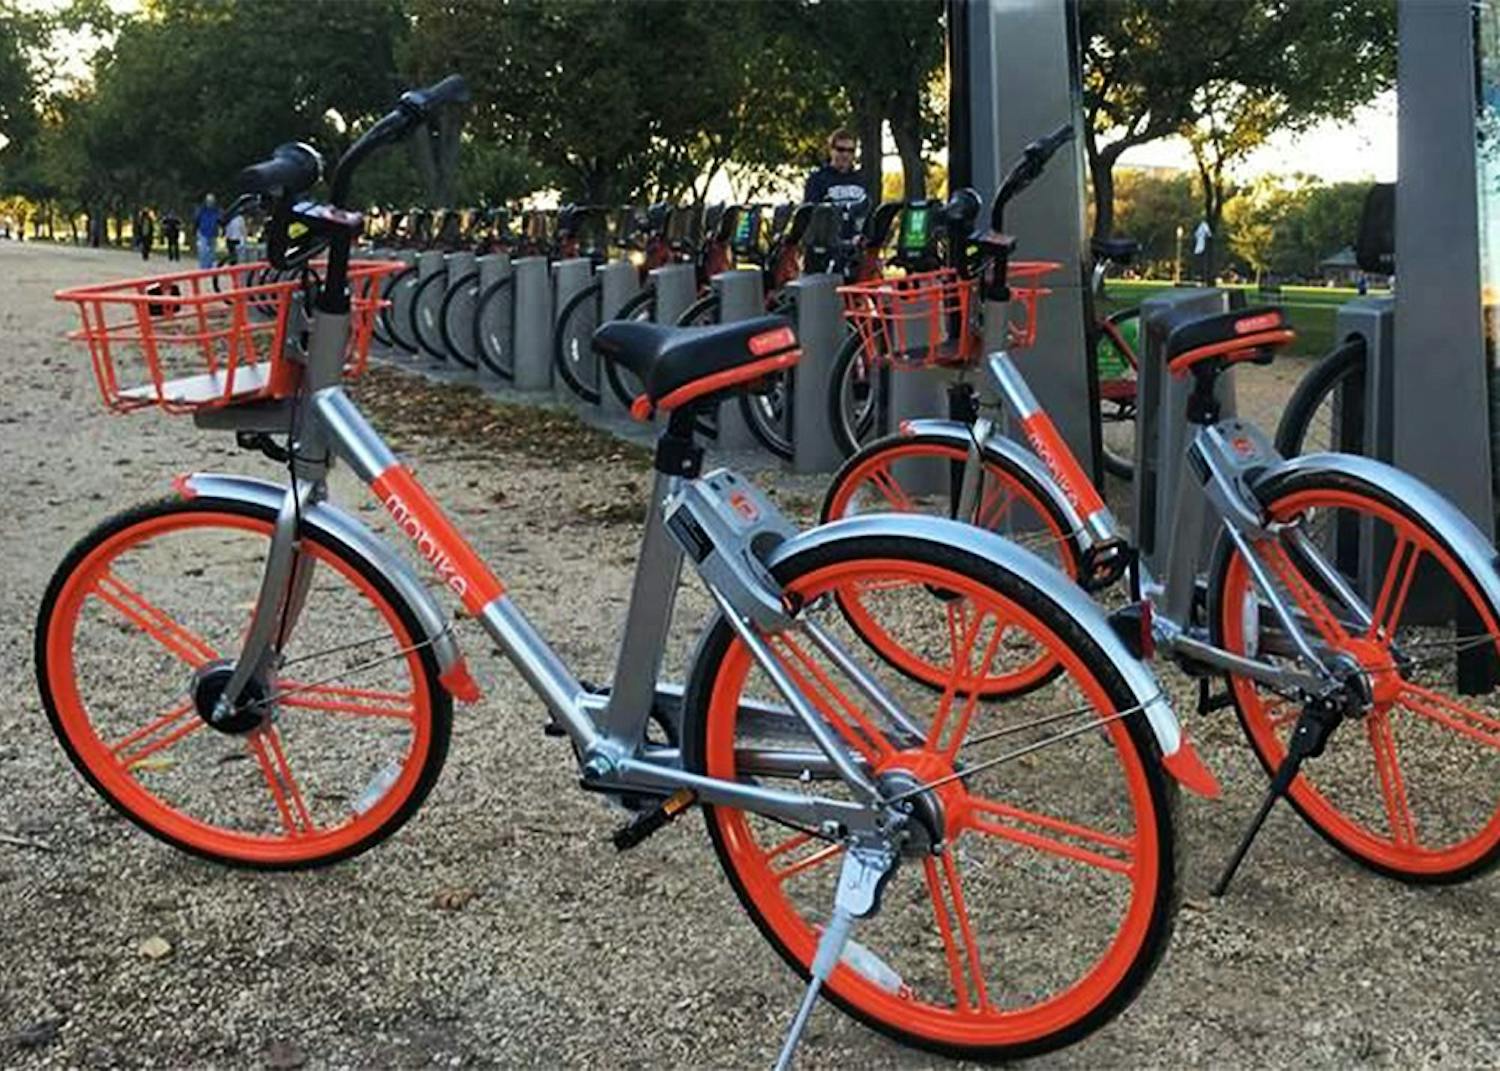 Dock-less bikes park next to a docking station for Capital Bikeshare, in Washington, D.C. Bloomington city officials will work with South Bend, the first city to implement a dock-less bikeshare program in Indiana, as it works to create a bikeshare program in Bloomington.